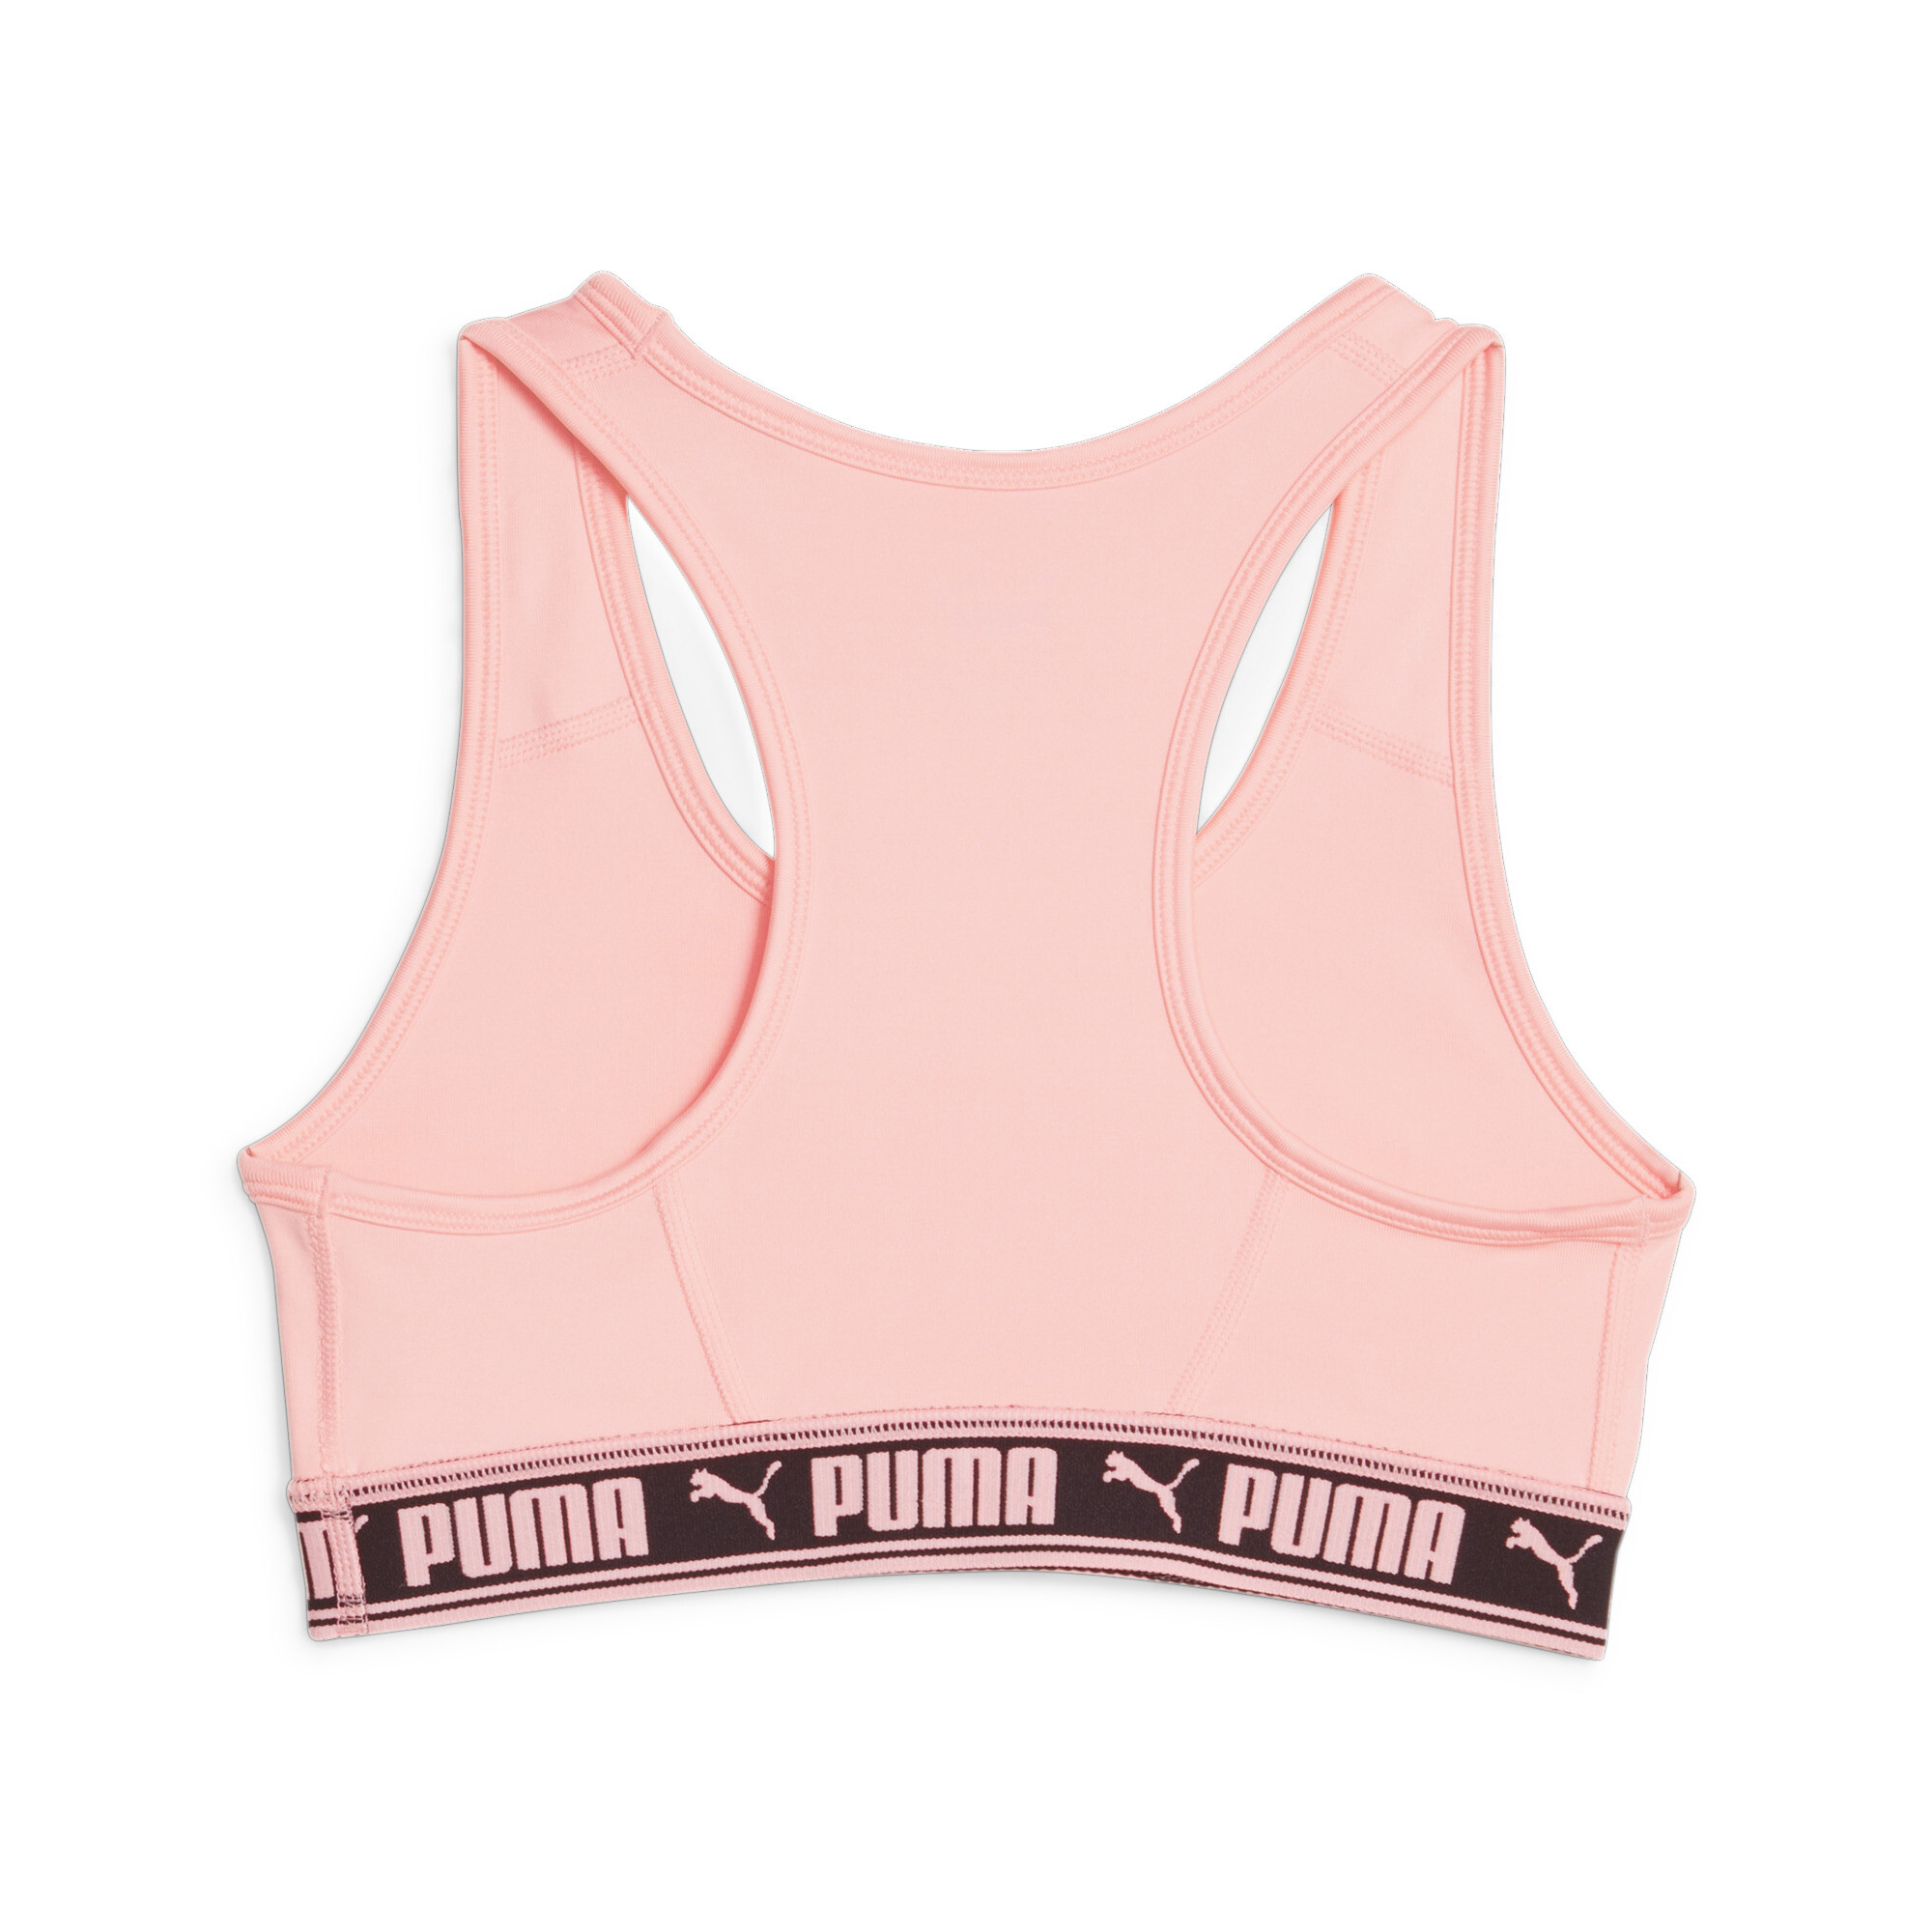 Women's Puma Strong Bra Youth, Pink, Size 5-6Y, Clothing